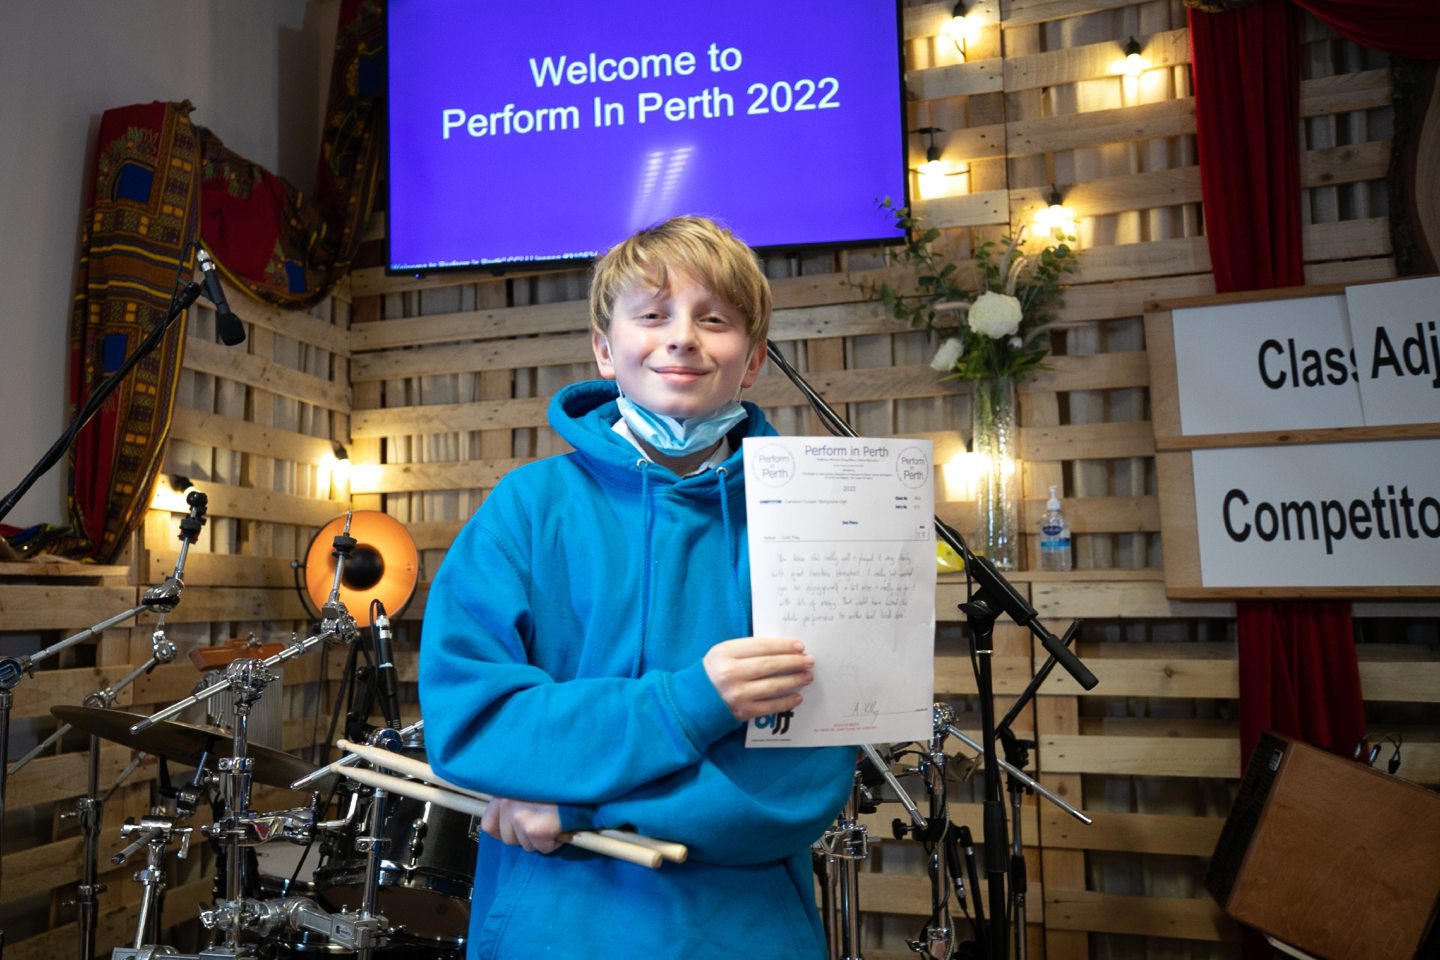 Cameron Coupar won the drum kit solo category in the 2022 Perform in Perth event.